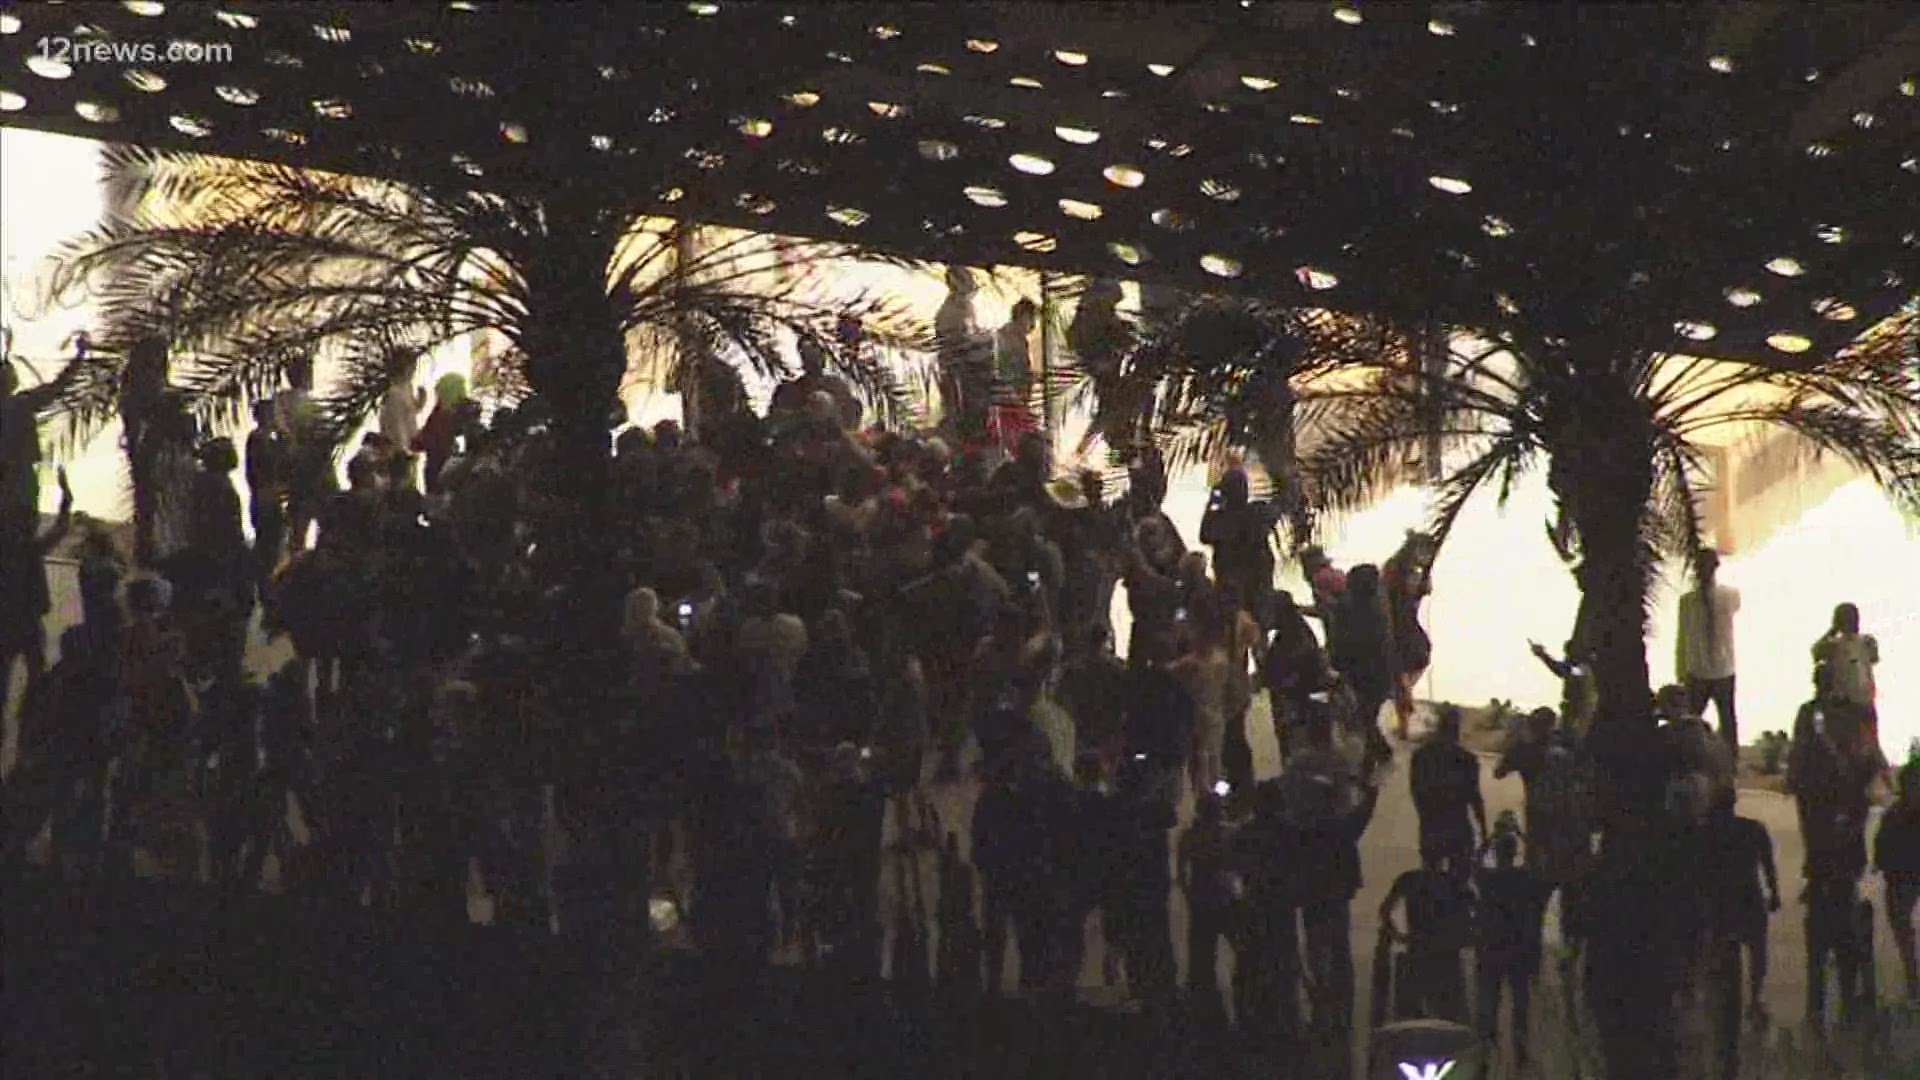 Looters break in to an Apple Store in Scottsdale during protests Saturday night. Sky 12 is over the scene.